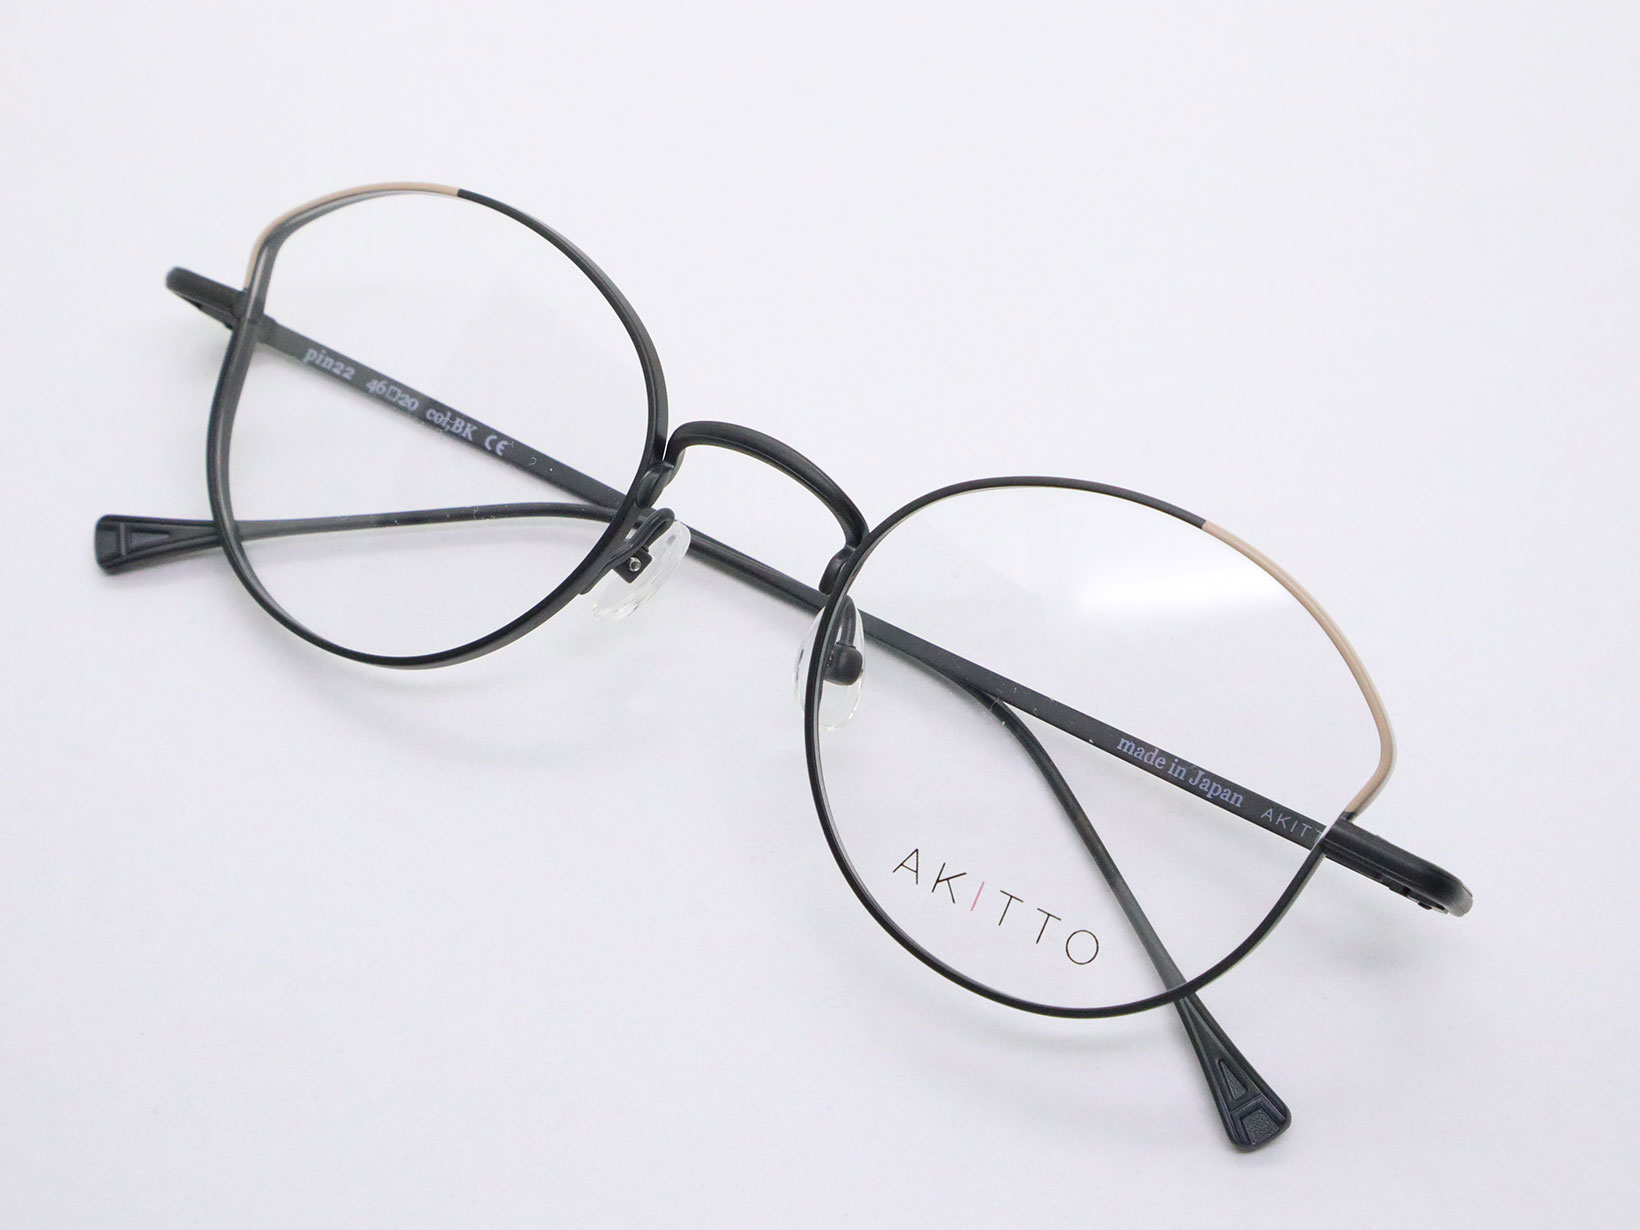 AKITTO 2023-1st pin22 color｜BK size:46□20 material:titanium price:￥48,950-(税込み) 